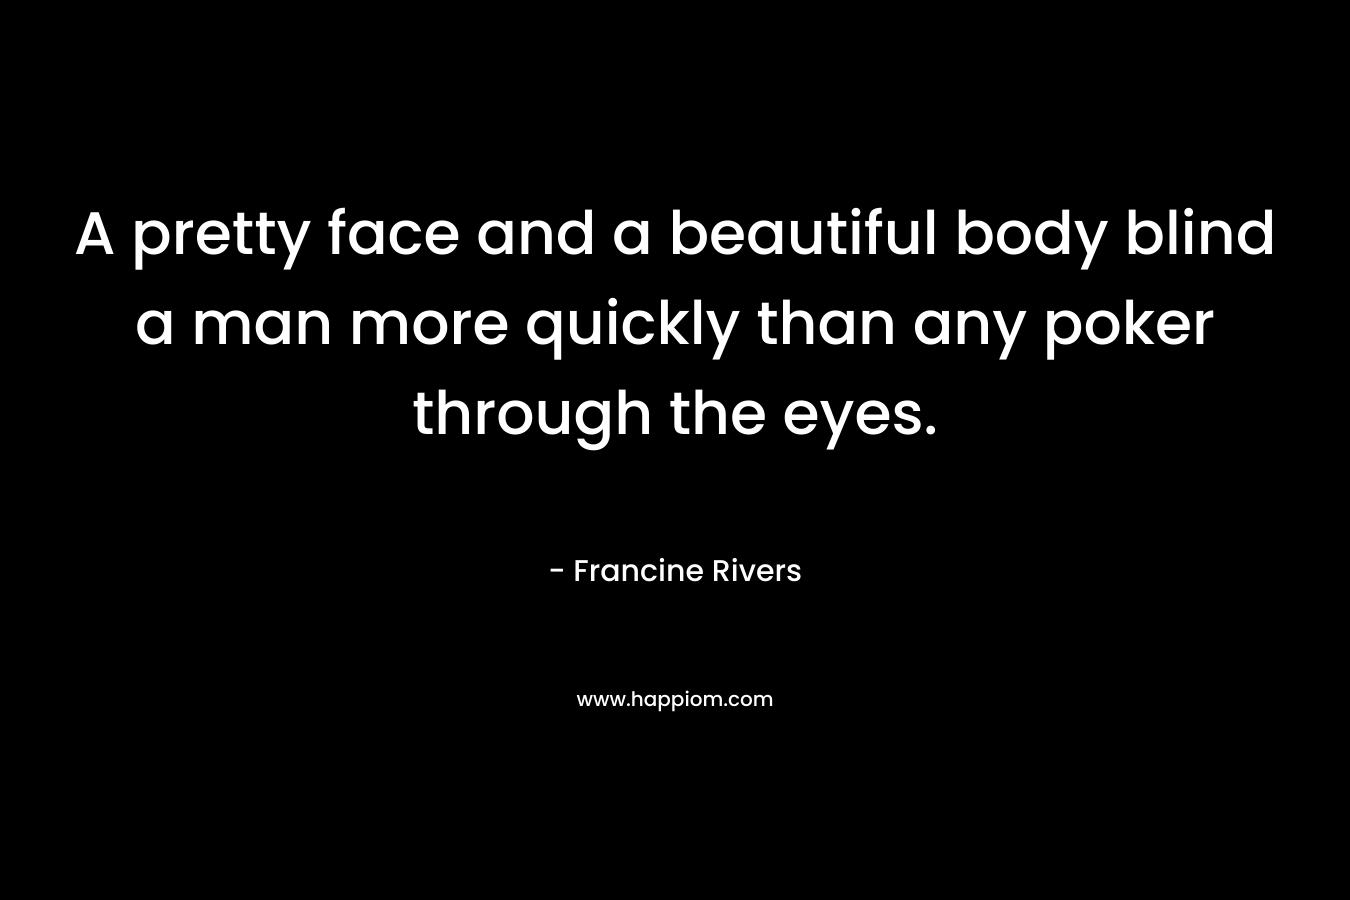 A pretty face and a beautiful body blind a man more quickly than any poker through the eyes.